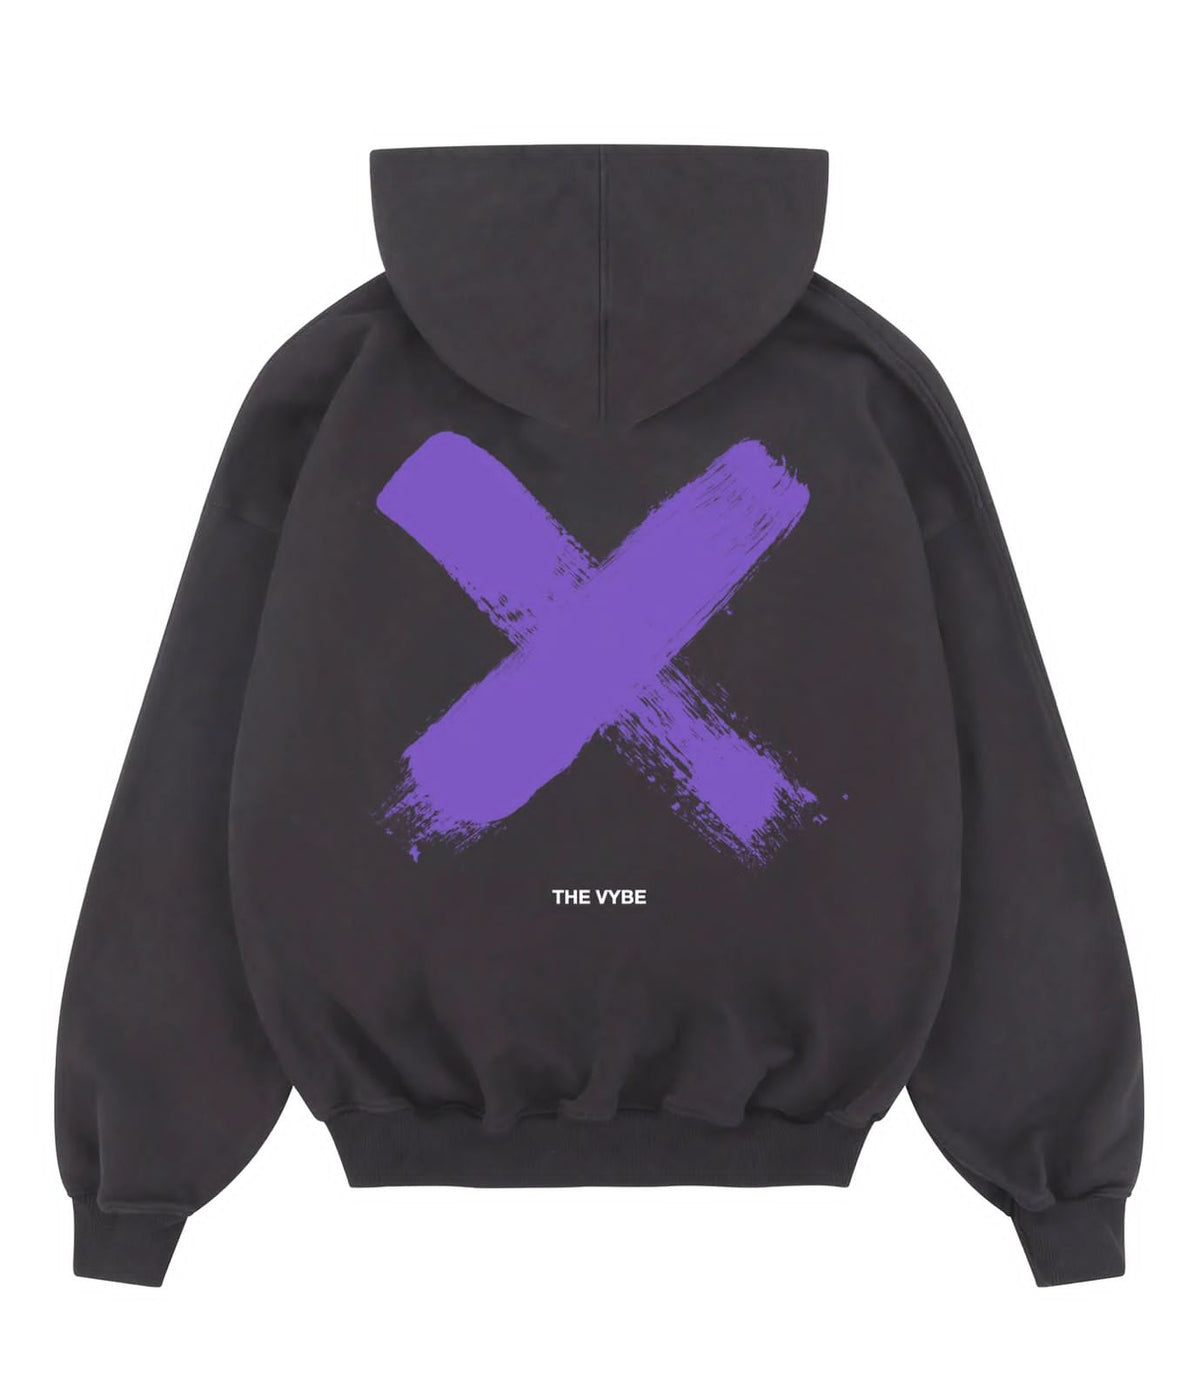 THE VYBE X Hoodie